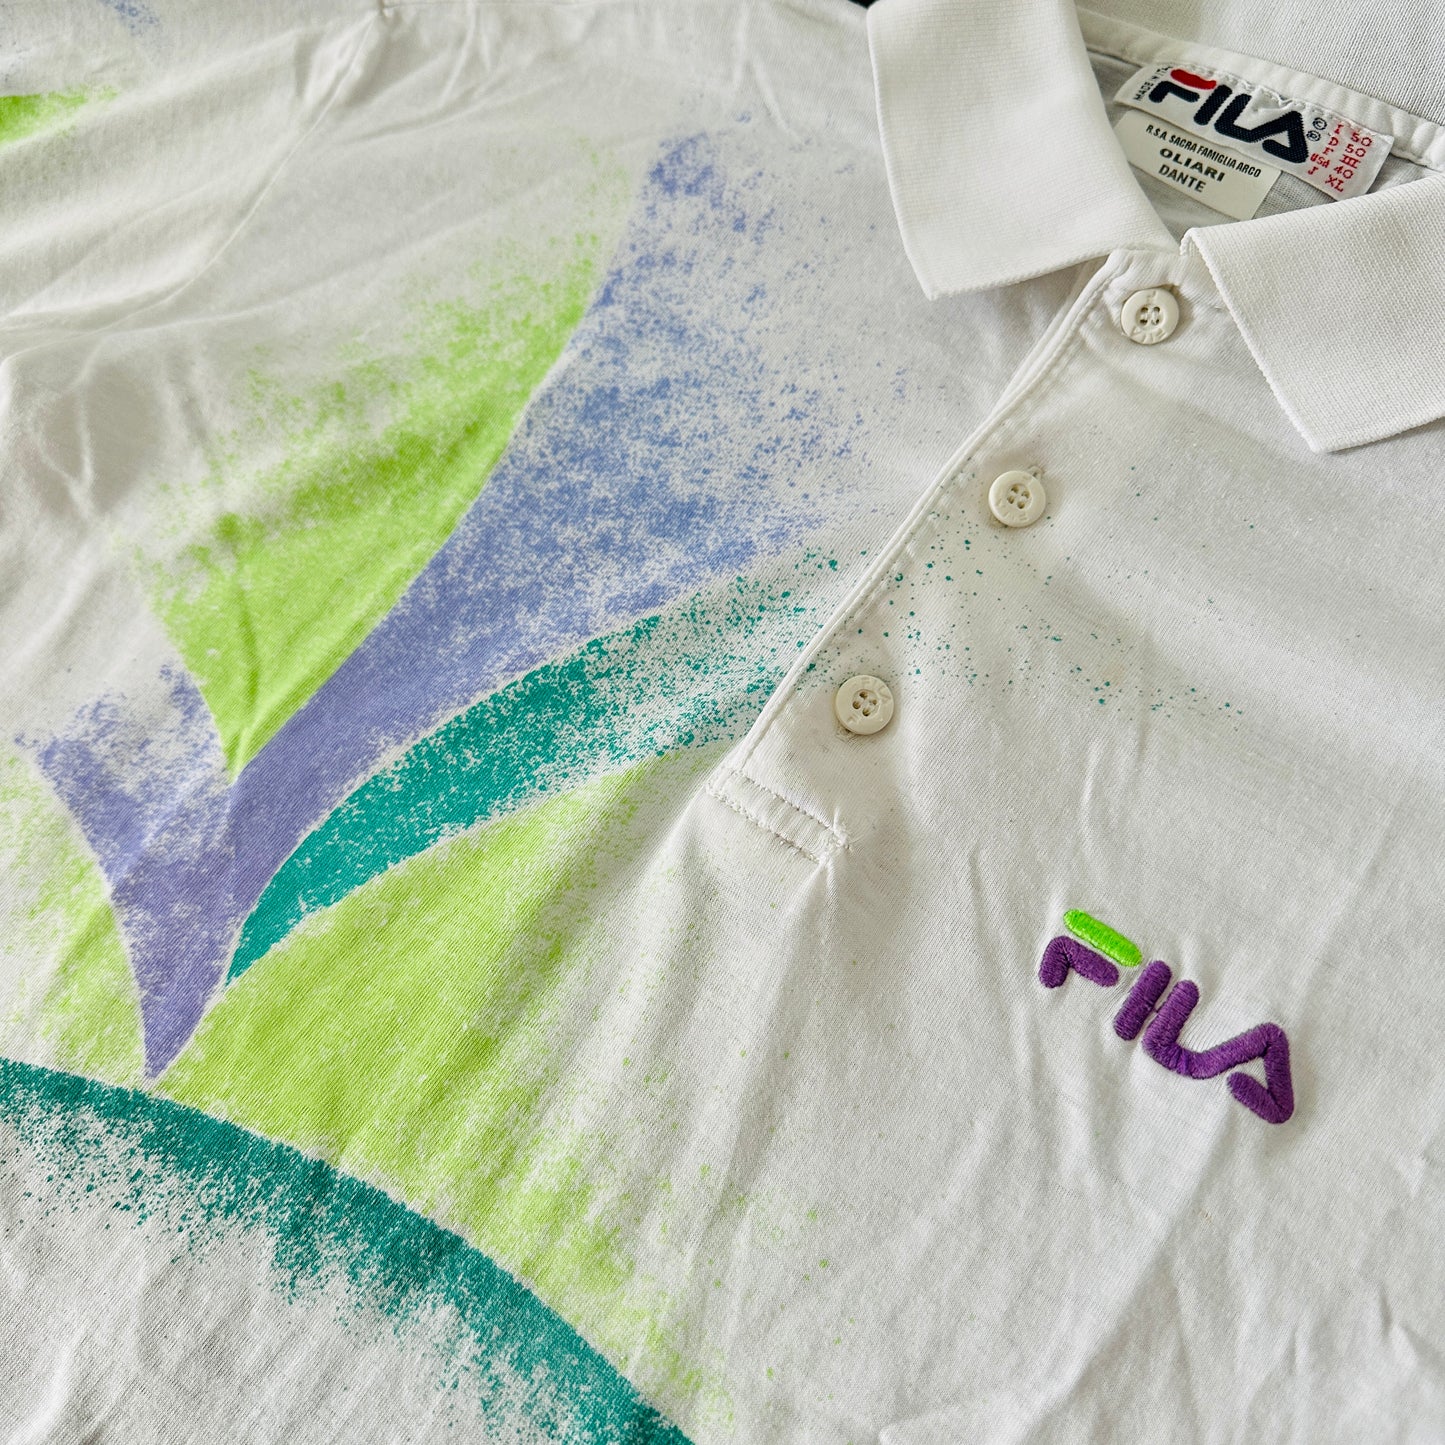 Fila Vintage 80s Tennis Polo Shirt - 50 / M - Made in Italy